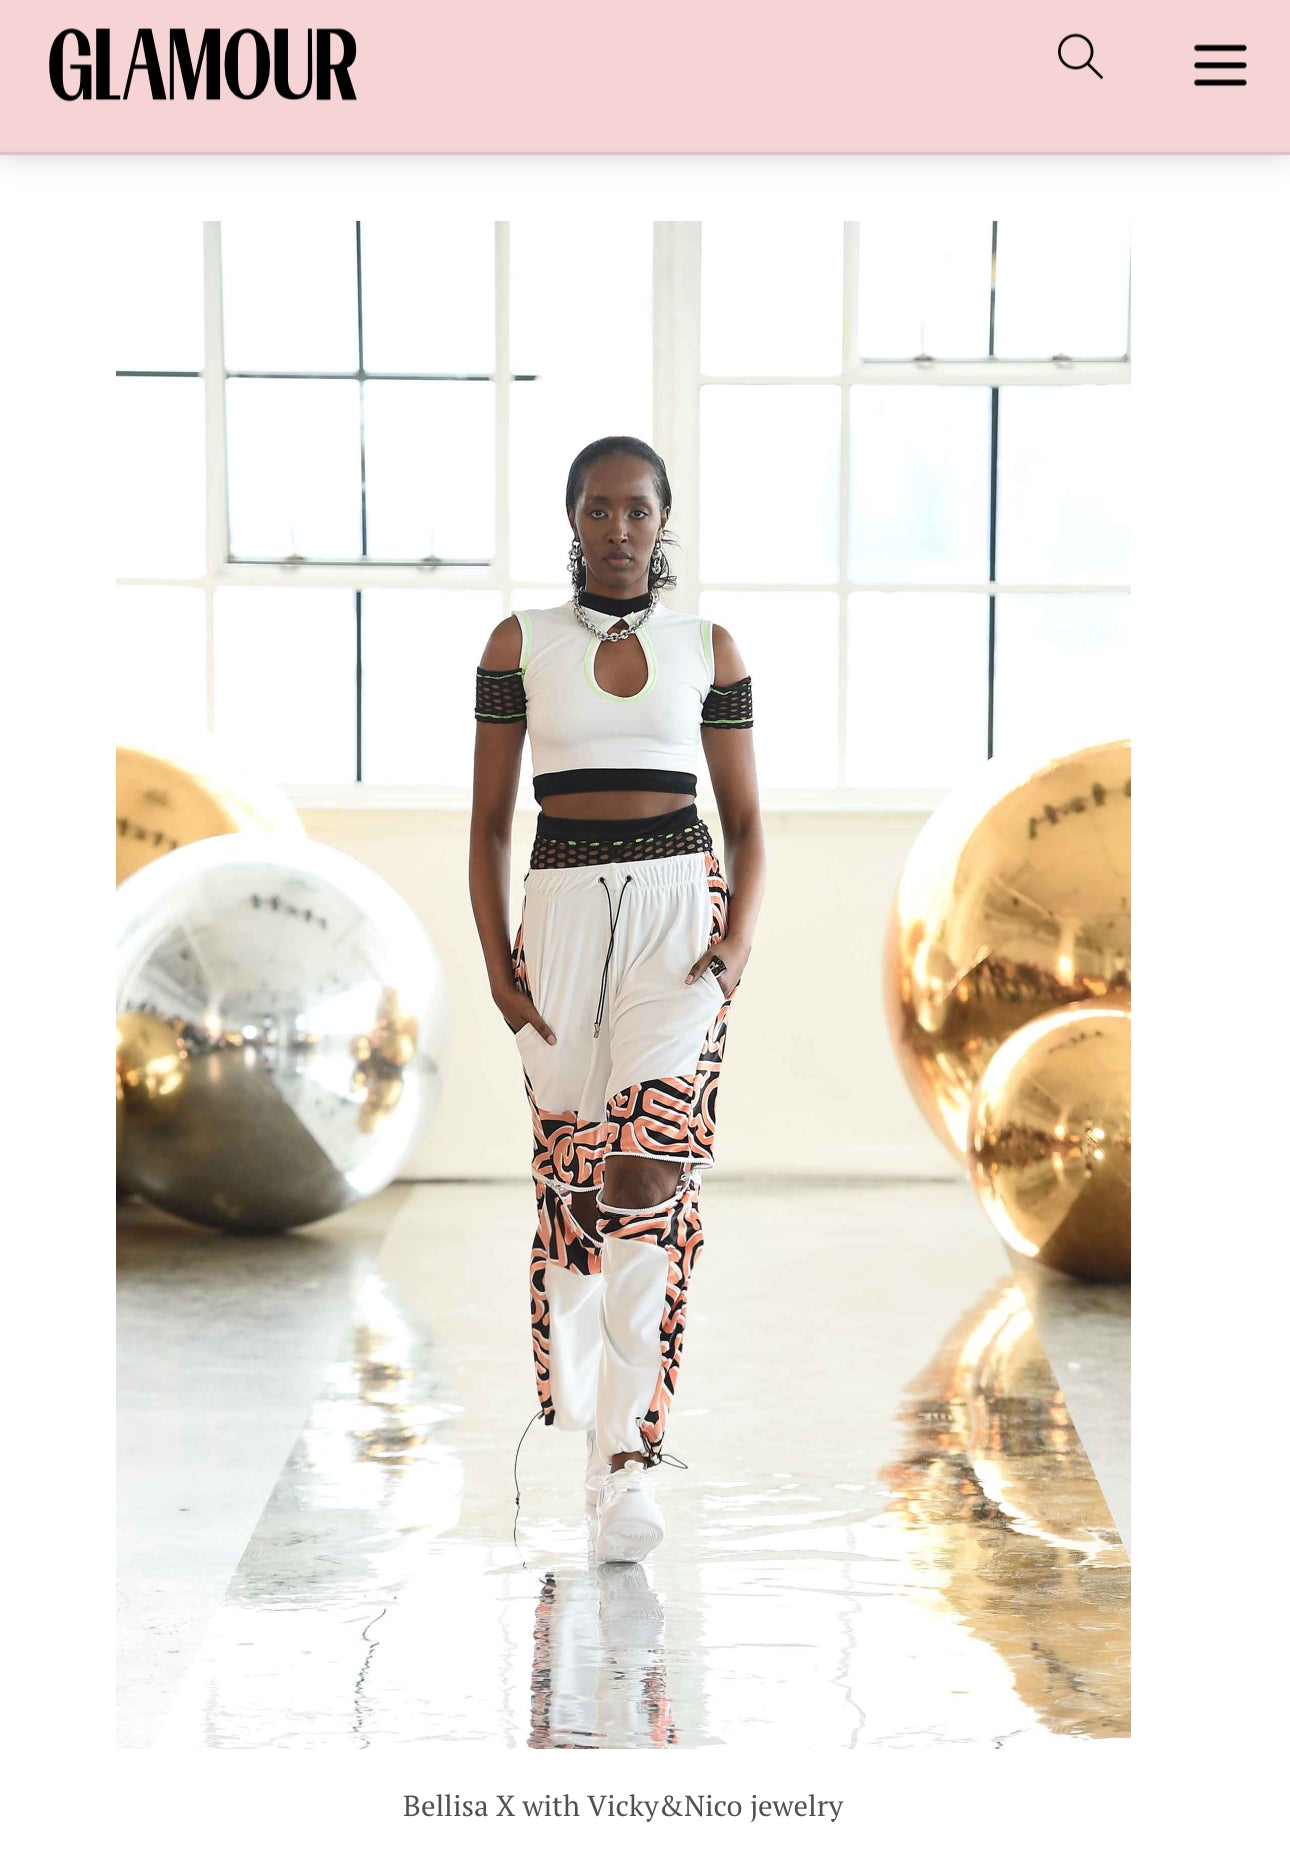 NYC model Elle walks the Catwalk for NYFW FW/24  at Canoe Studios in Manhattan wearing Bellisa X streetwear x clubwear featured in GLAMOUR magazine. Outfit: White Velour Fishnet Crop Top, White and Abstract Orange Patterned Velour Wide Leg Tracksuit Bottoms.